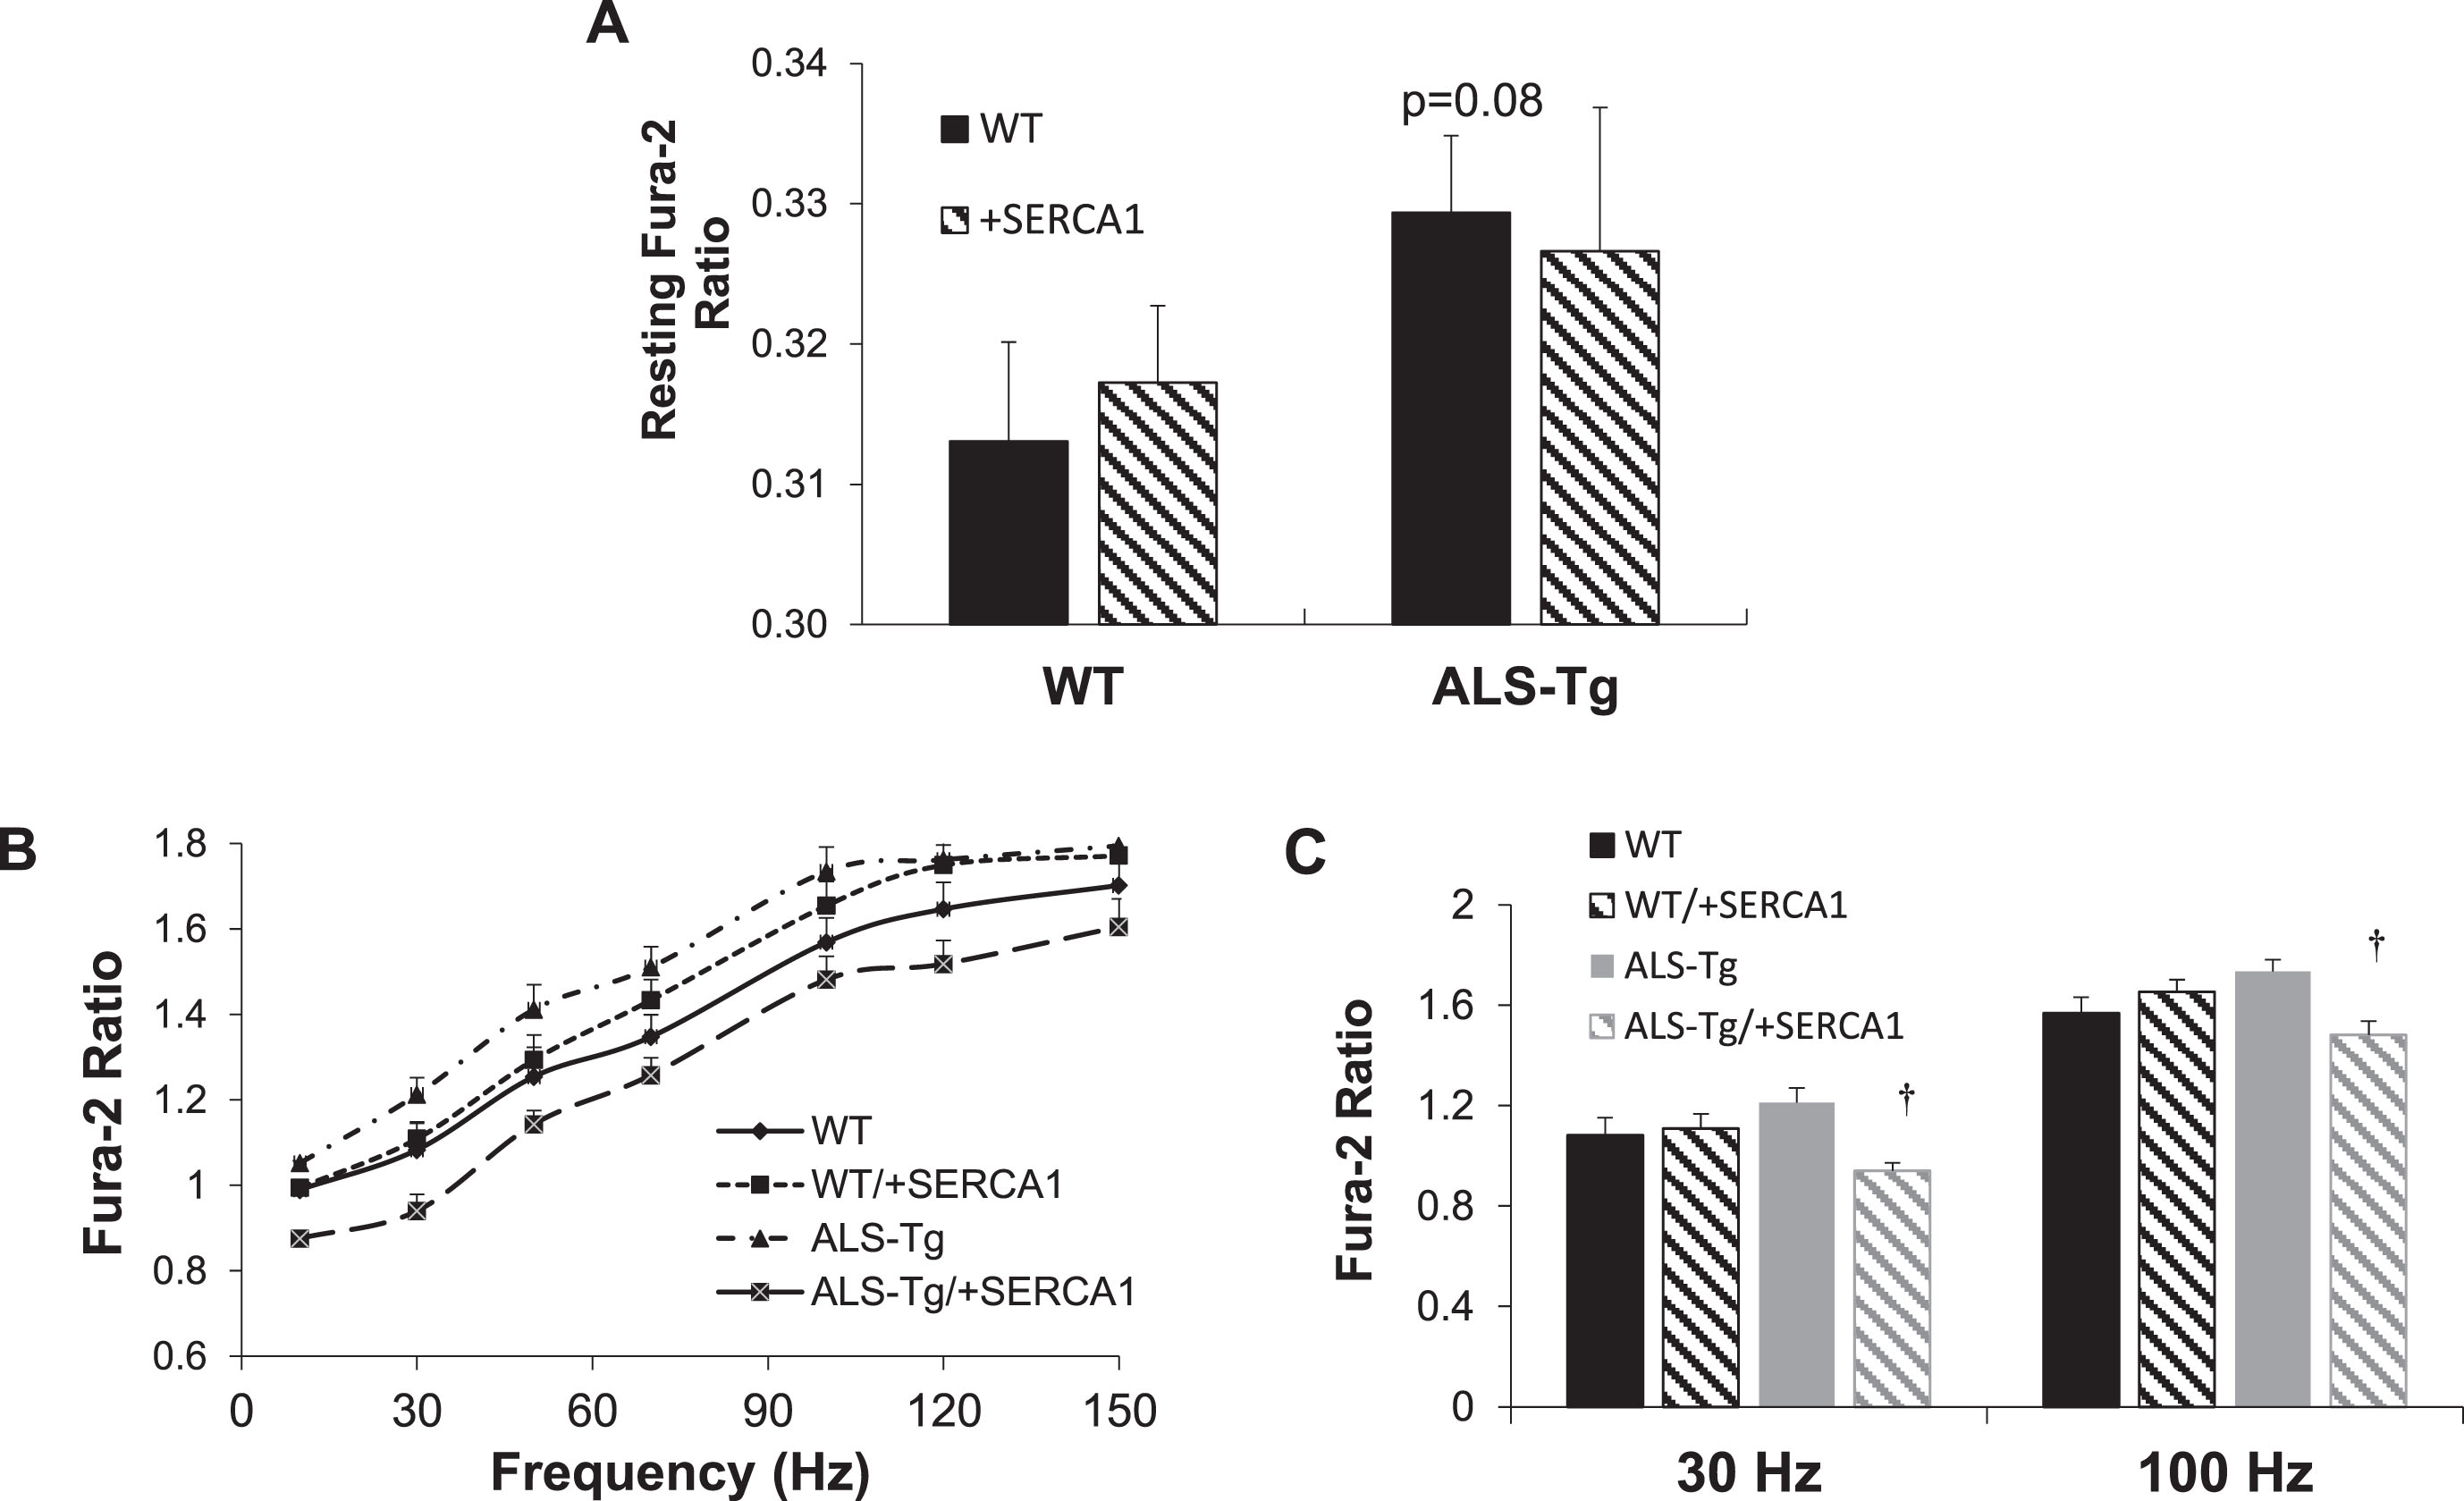 SERCA1 overexpression reduces electrical stimulation evoked Ca2+ transients in ALS-Tg mice. A) Resting Fura-2 ratios in intact single fibers from the flexor digitorum brevis (FDB) of WT and ALS-Tg mice with and without SERCA1 overexpression. B) Peak Fura-2 ratios in intact single fibers from FDB shown as a function of stimulation frequency. C) Peak Fura-2 ratios in intact single fibers from FDB at 30 and 100 Hz stimulation. Data shown are from WT (n = 33), WT/+SERCA1 (n = 33), ALS-Tg (n = 28) and ALS-Tg/+SERCA1 (n = 33). Values shown represent mean±SEM. †p < 0.05 vs. ALS-Tg.